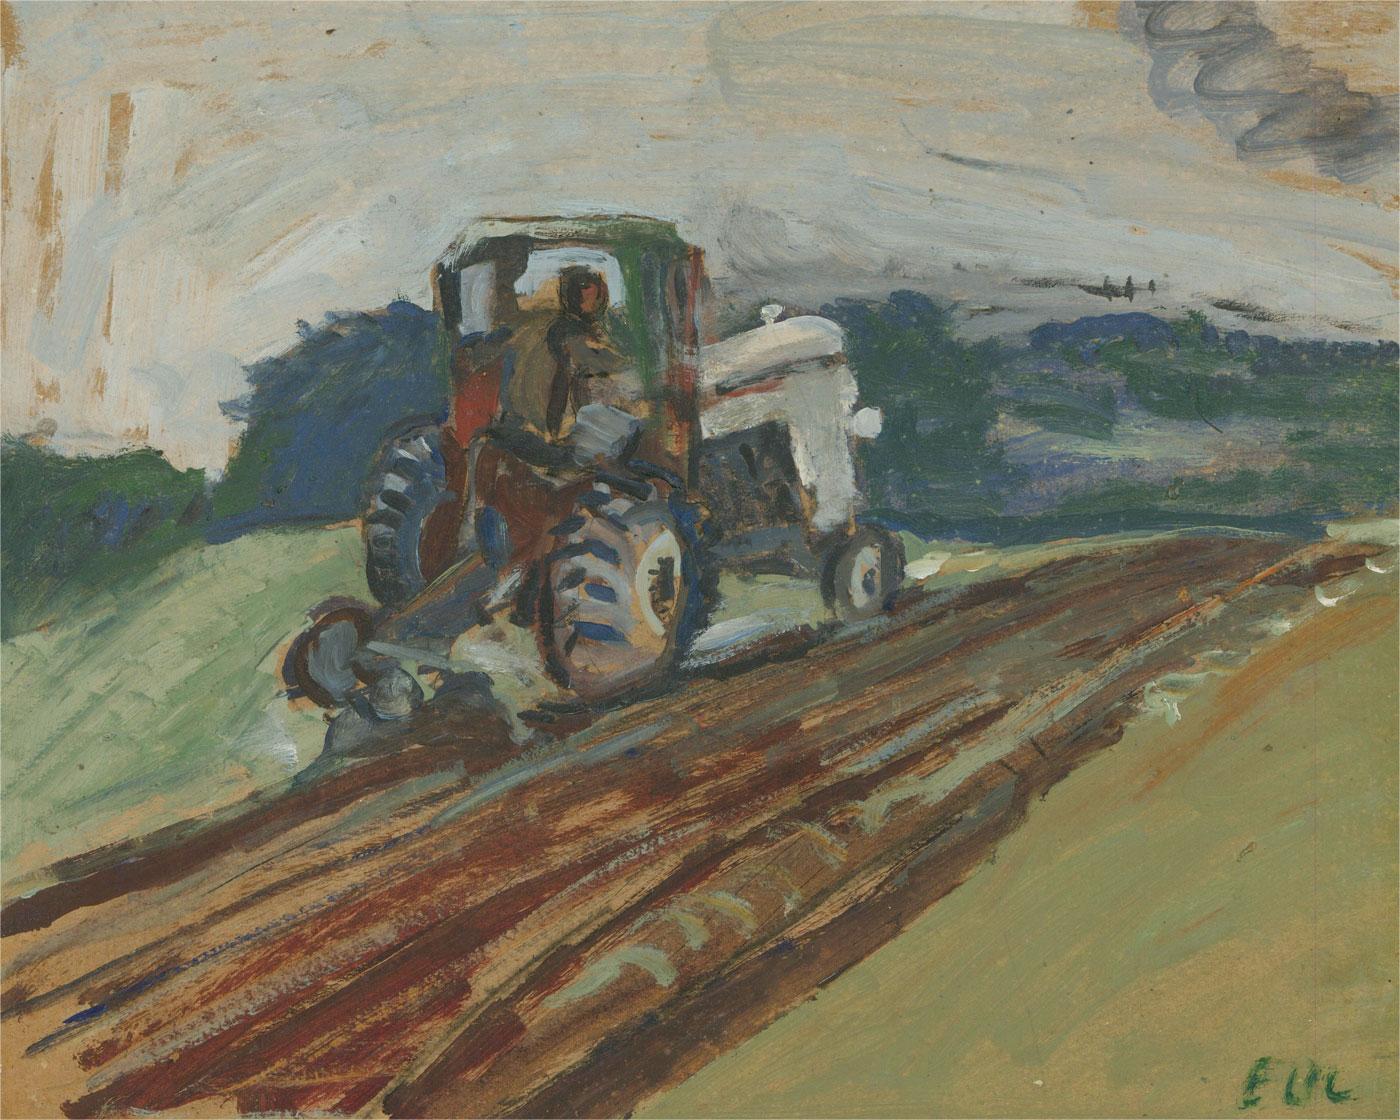 Deep lines of umber mud lead the eye through this peaceful impressionistic study of a tractor ploughing a field. Lewis's direct style of paint application allows the painting to exhale an atmosphere of honesty, transporting the viewer to the muddy